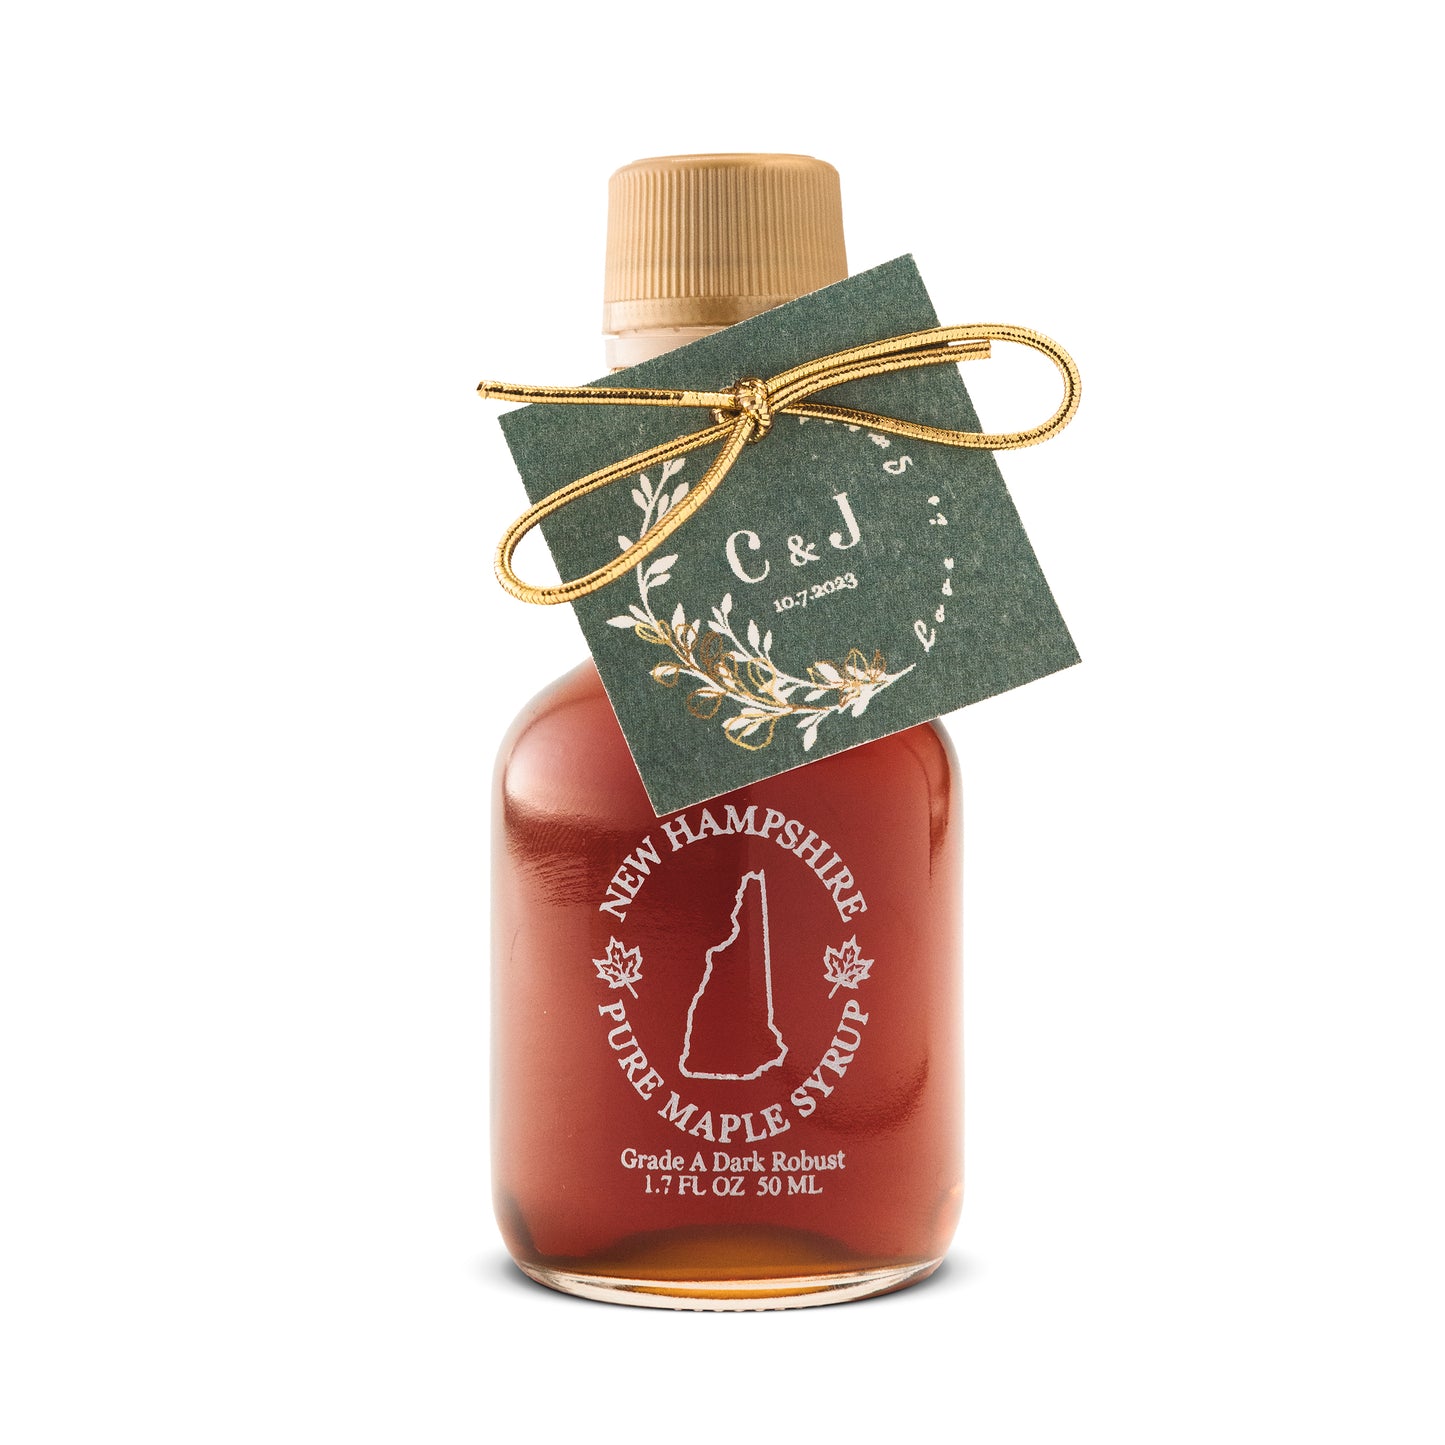 Pure Maple Syrup Favors - New Hampshire Glass Nip Bottle - 1.7 oz - CUSTOM TAG